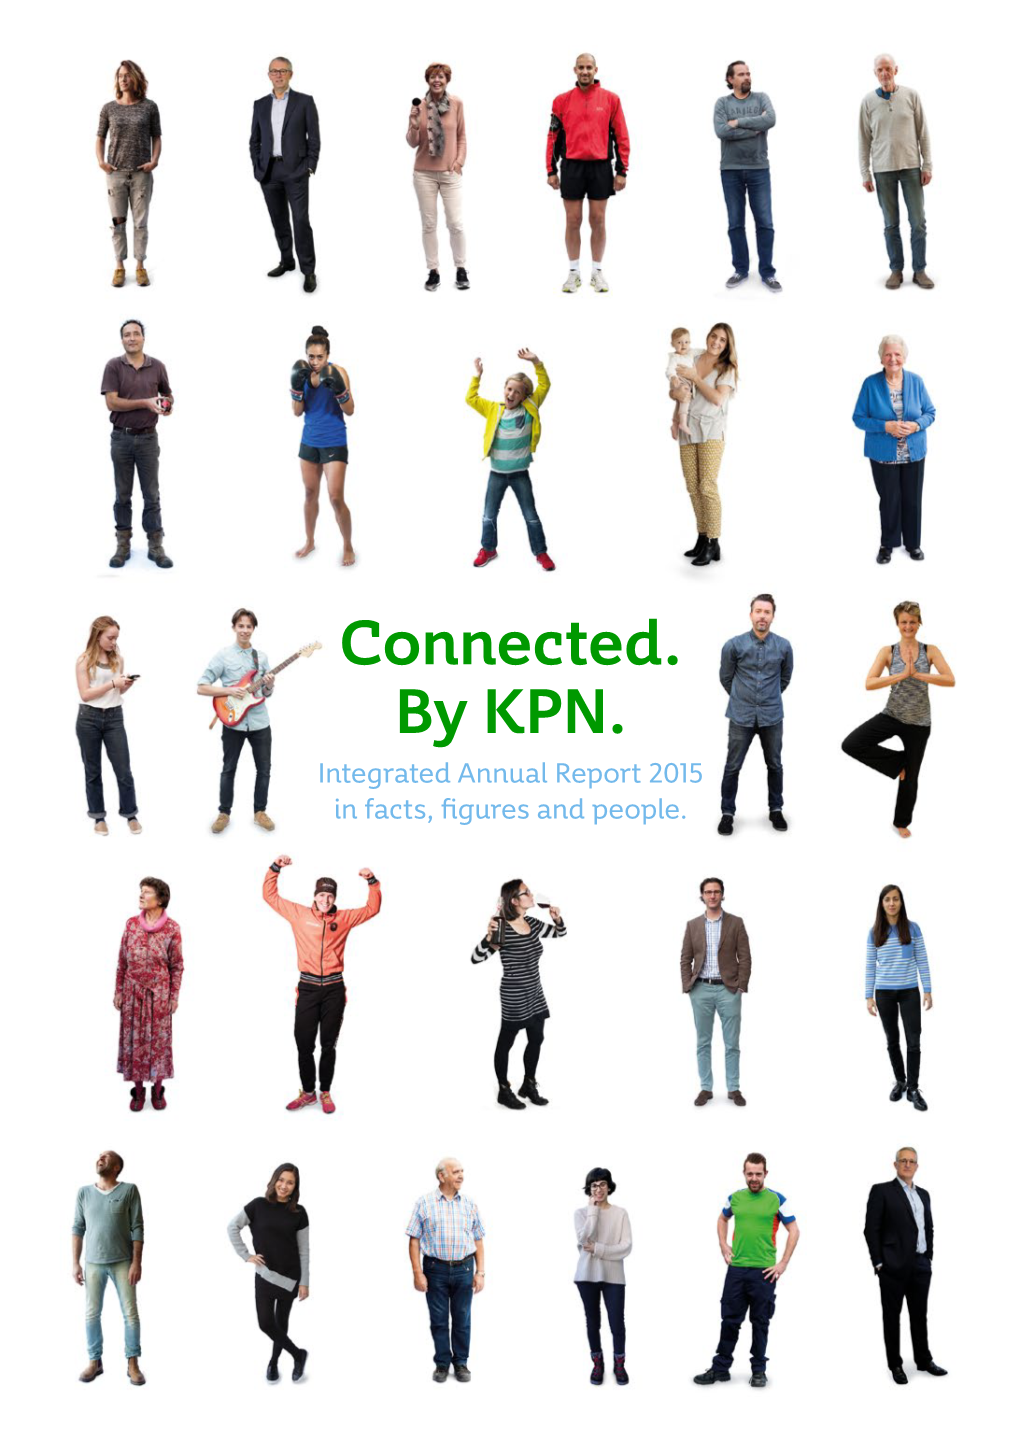 Connected. by KPN. Integrated Annual Report 2015 in Facts, Figures and People